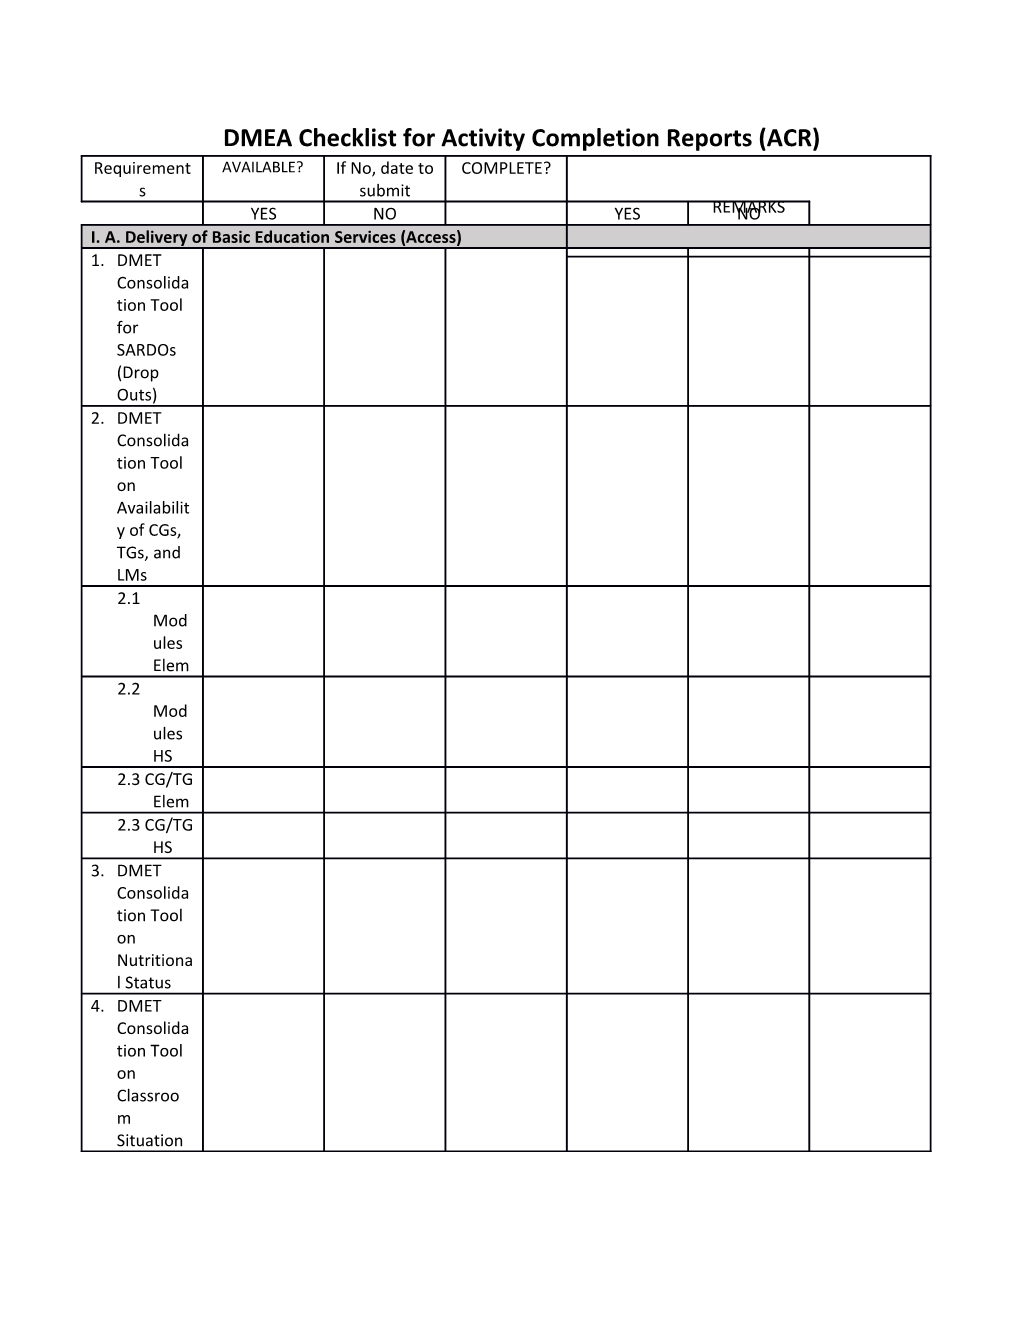 DMEA Checklist for Activity Completion Reports (ACR)